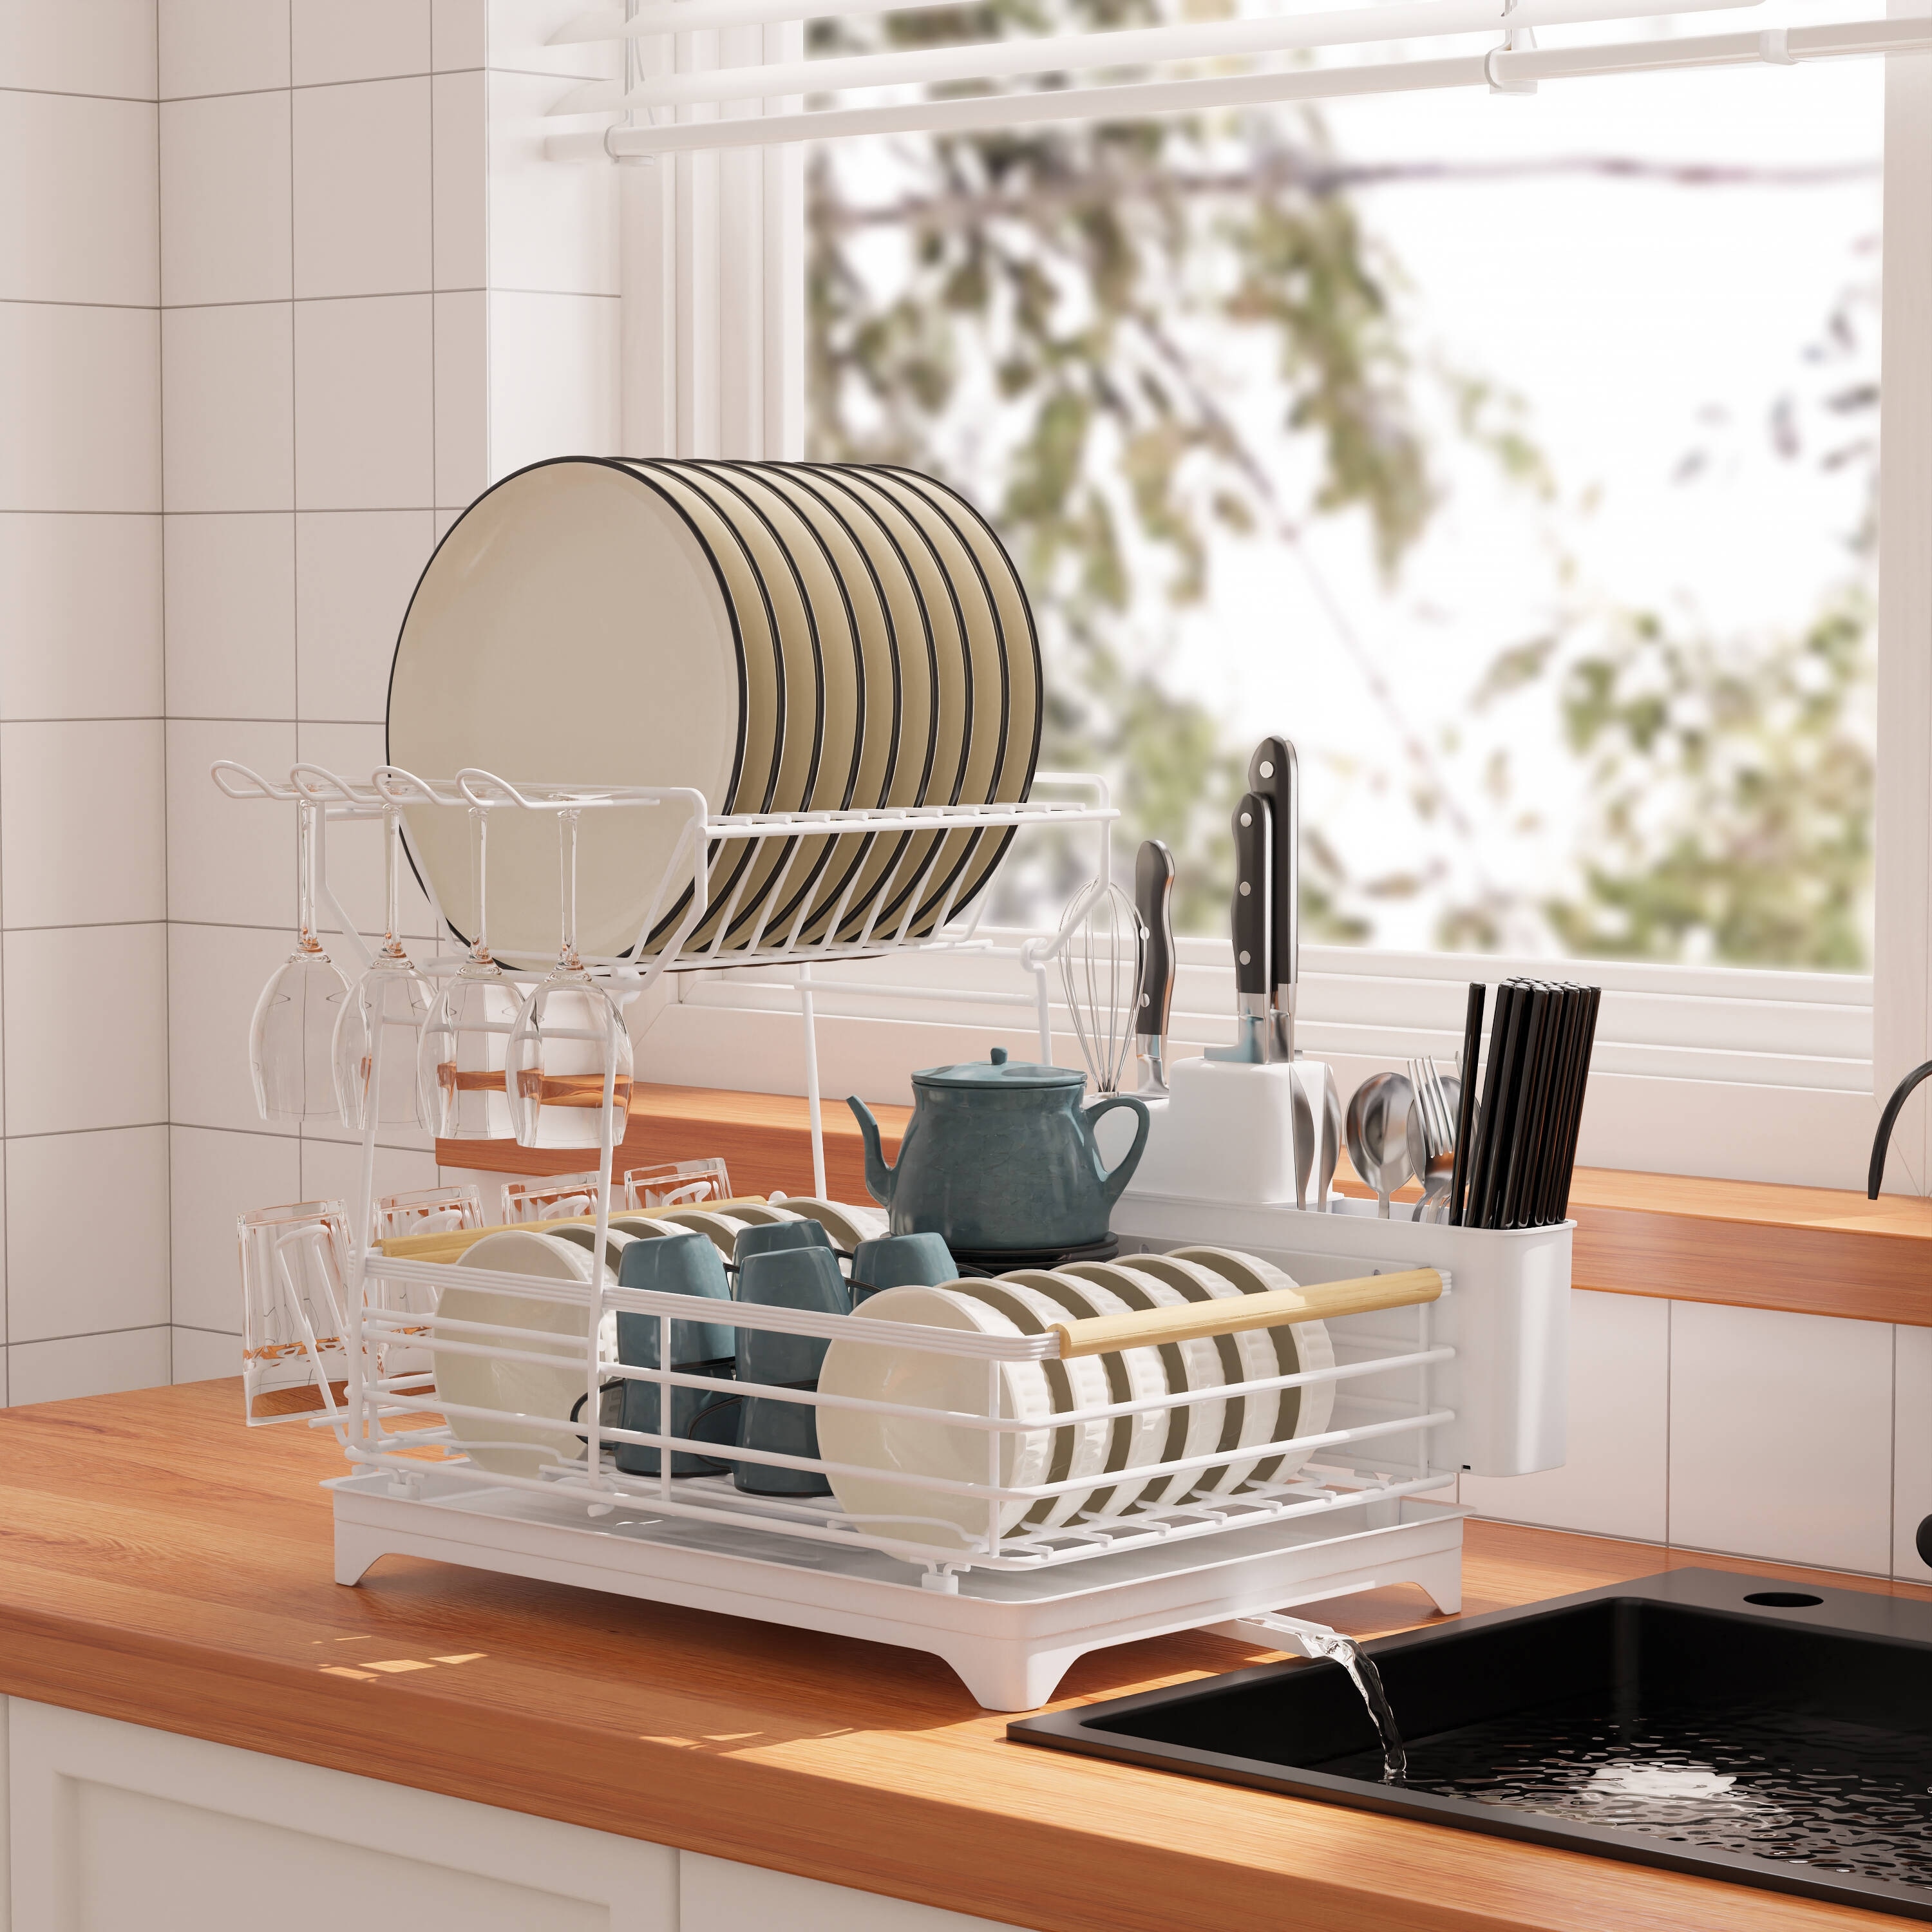 https://ak1.ostkcdn.com/images/products/is/images/direct/76a476e72d87271e039b93e247bc72fa503431a0/Double-Layer-Dish-Rack-with-Bamboo-Handle.jpg